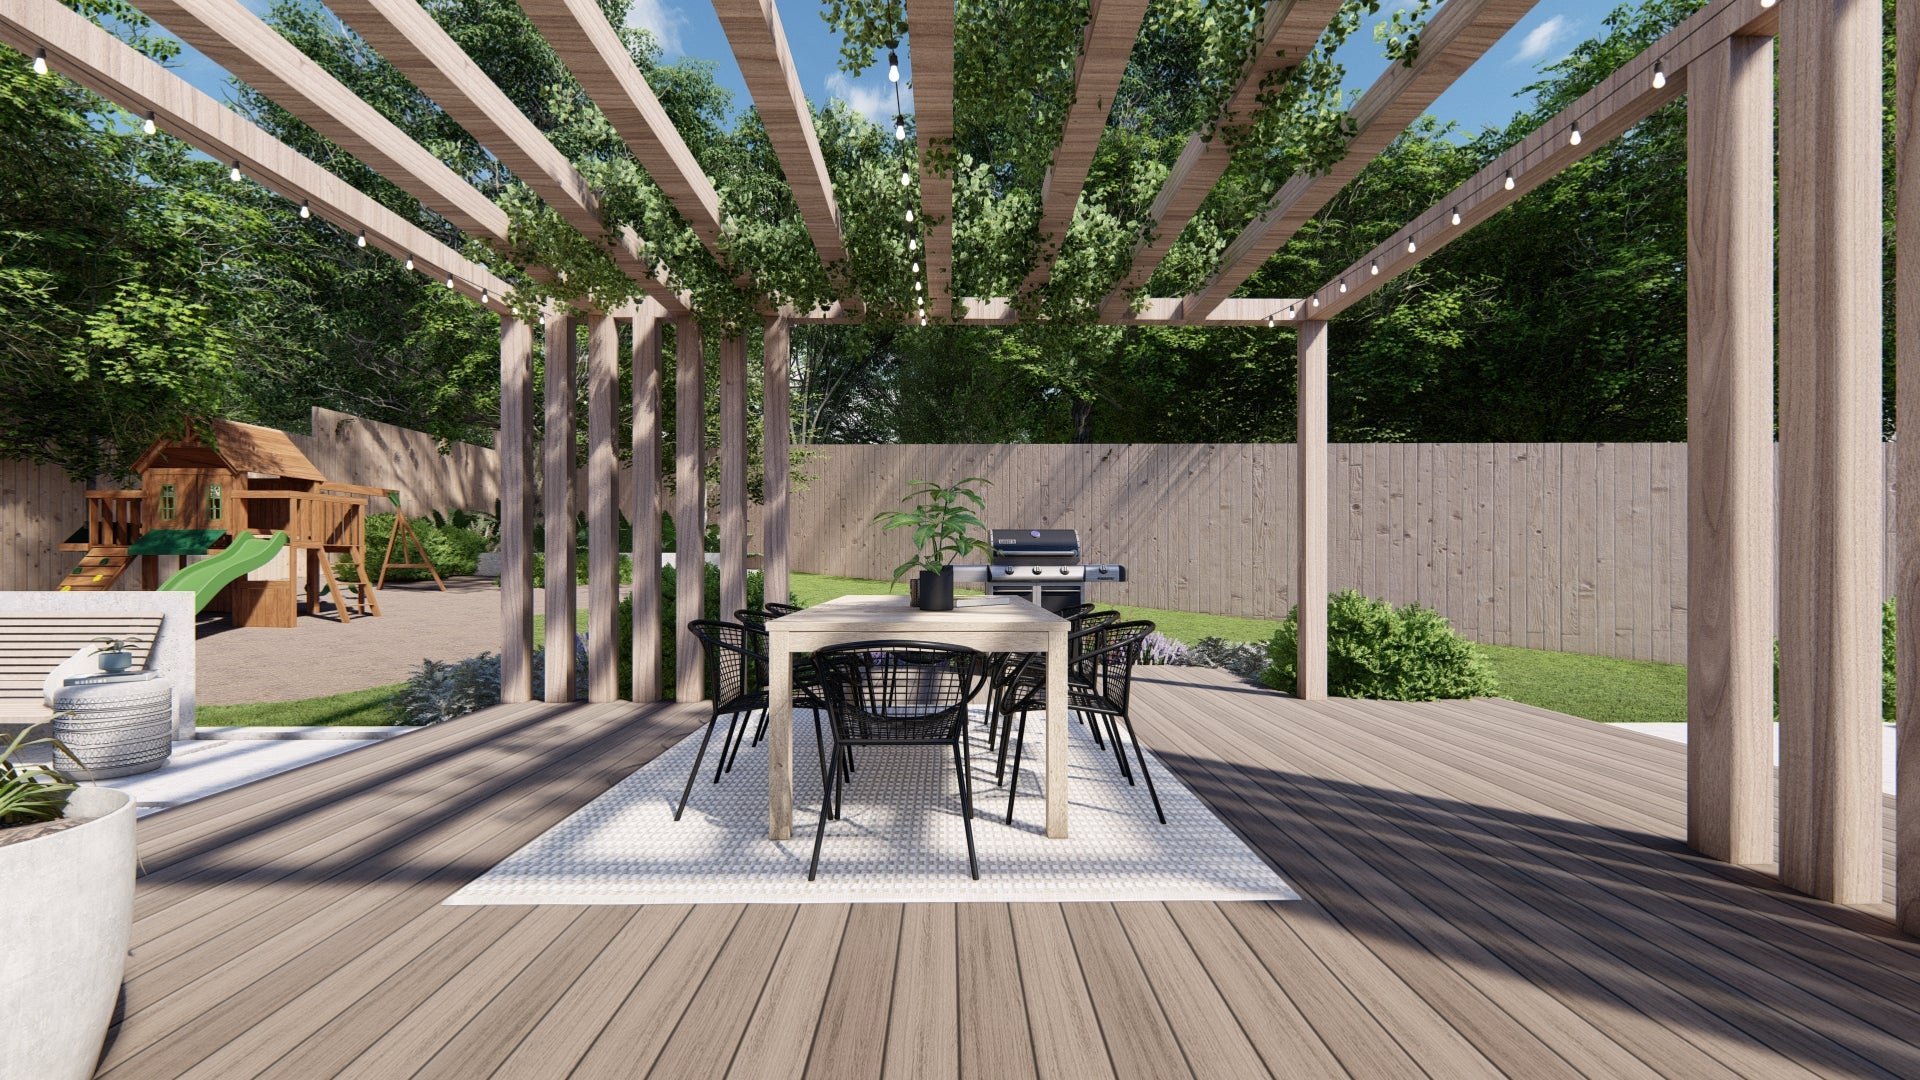 The Capri table achieves a more casual vibe on a pergola-covered deck with stackable black metal chairs for a backyard design for our client in Riverton, UT.